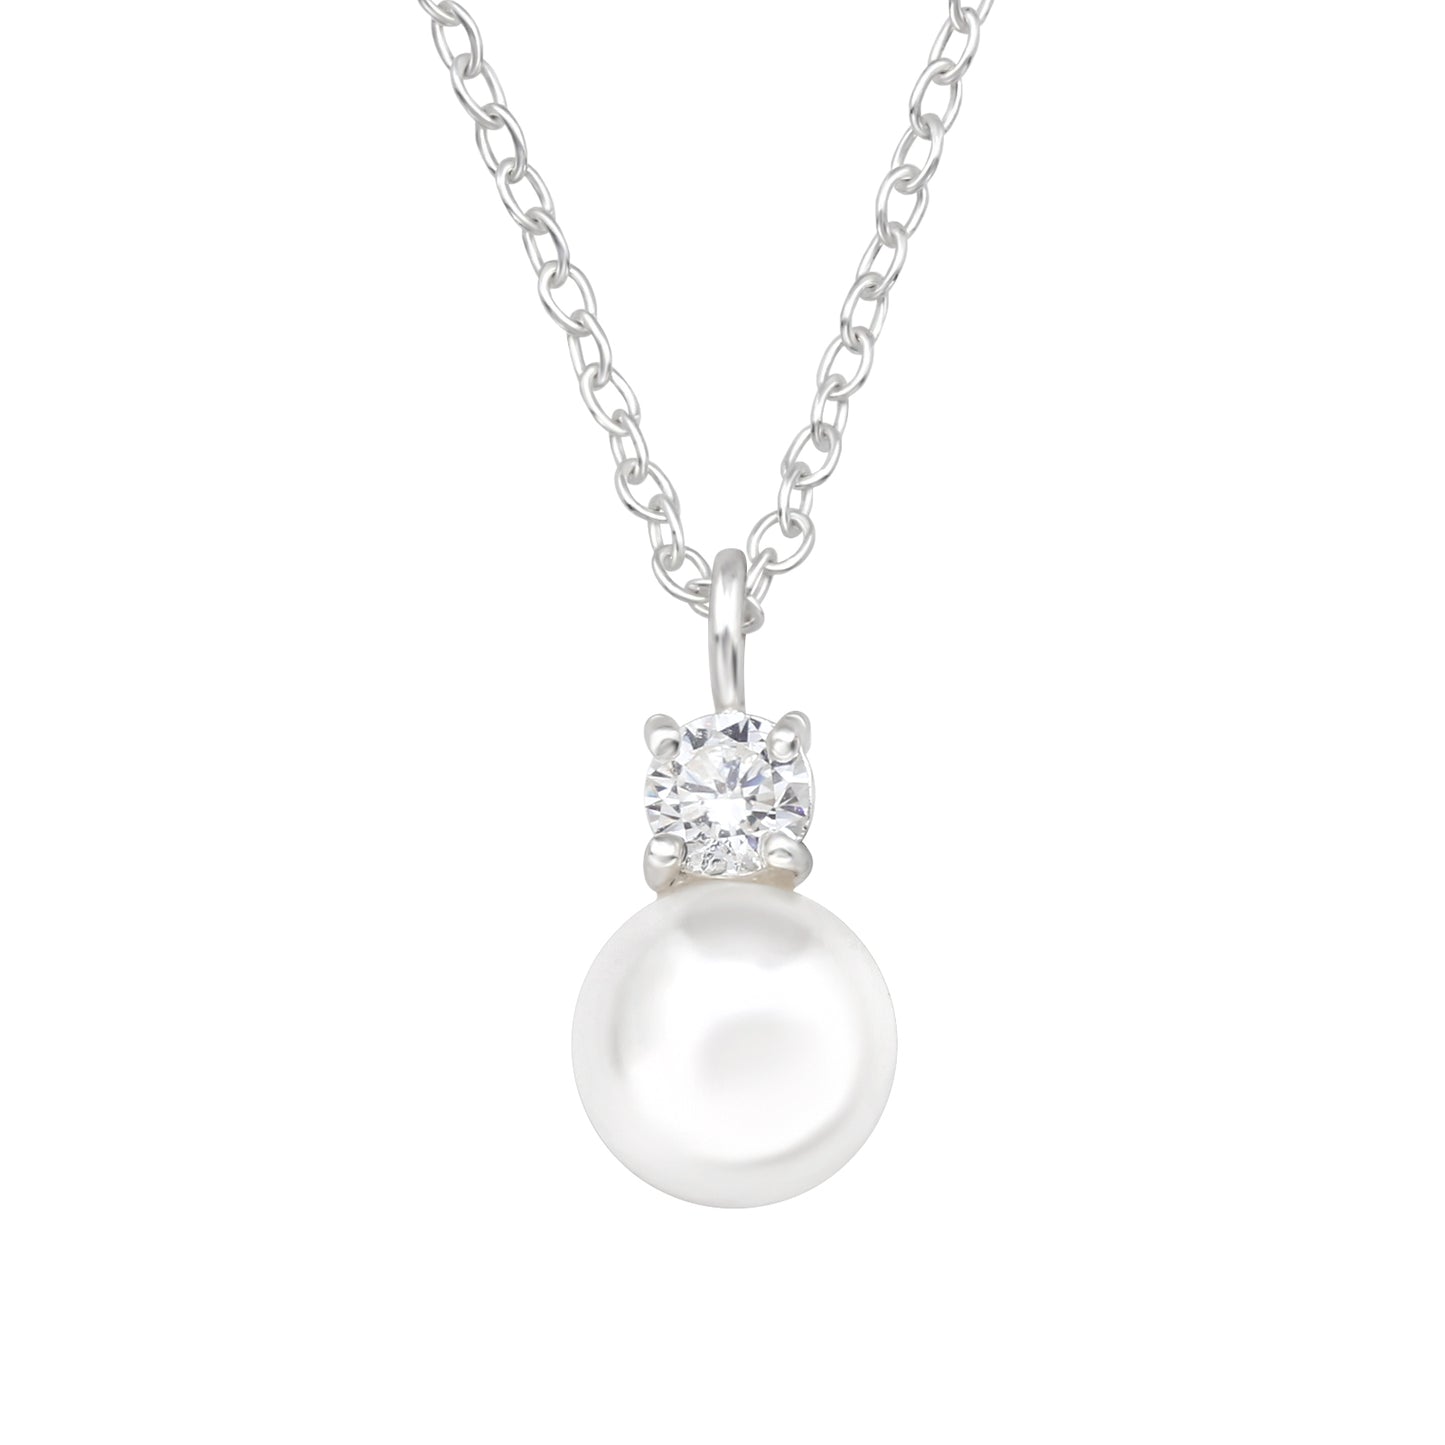 CZ Crystal with Synthetic Pearl Pendant Necklace - 925 Sterling Silver